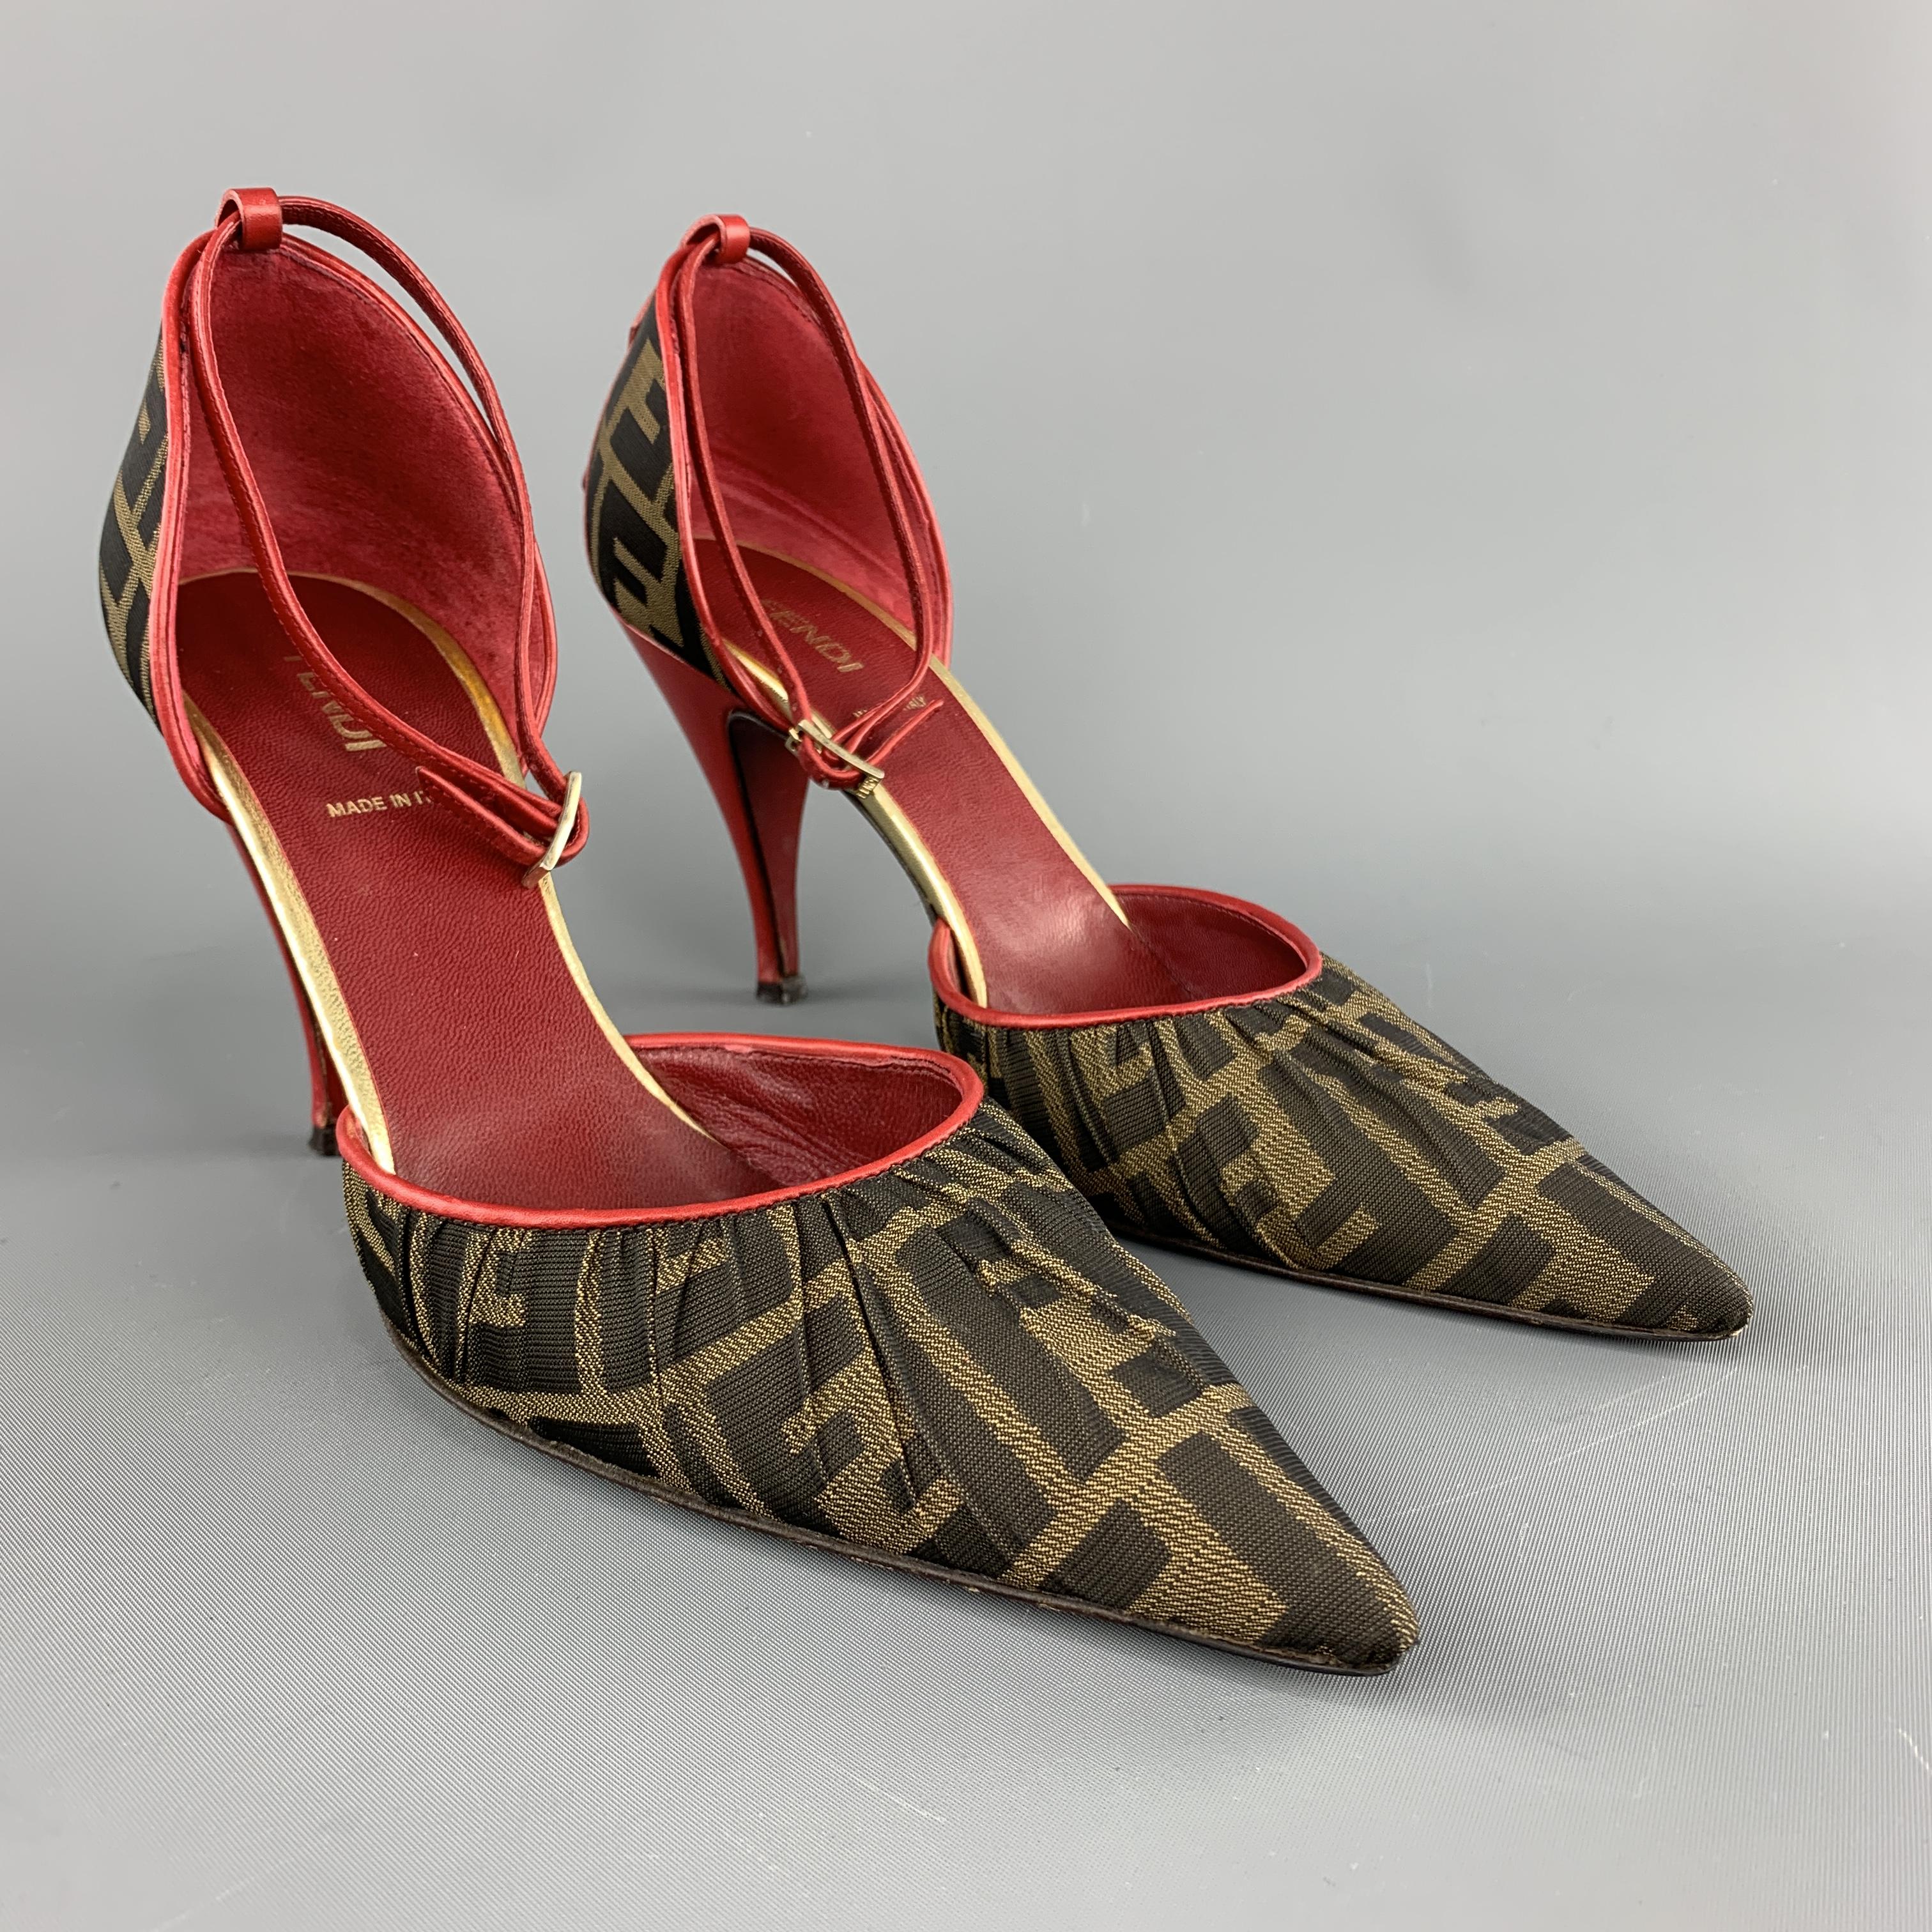 FENDI pumps come in brown monogram Zucca FF canvas with a gathered pointed toe, red leather trim, ankle strap, studded heel, and leather covered stiletto. Minor wear. As-is. Made in Italy.

Very Good Pre-Owned Condition.
Marked: IT 38

Heel: 4 in. 